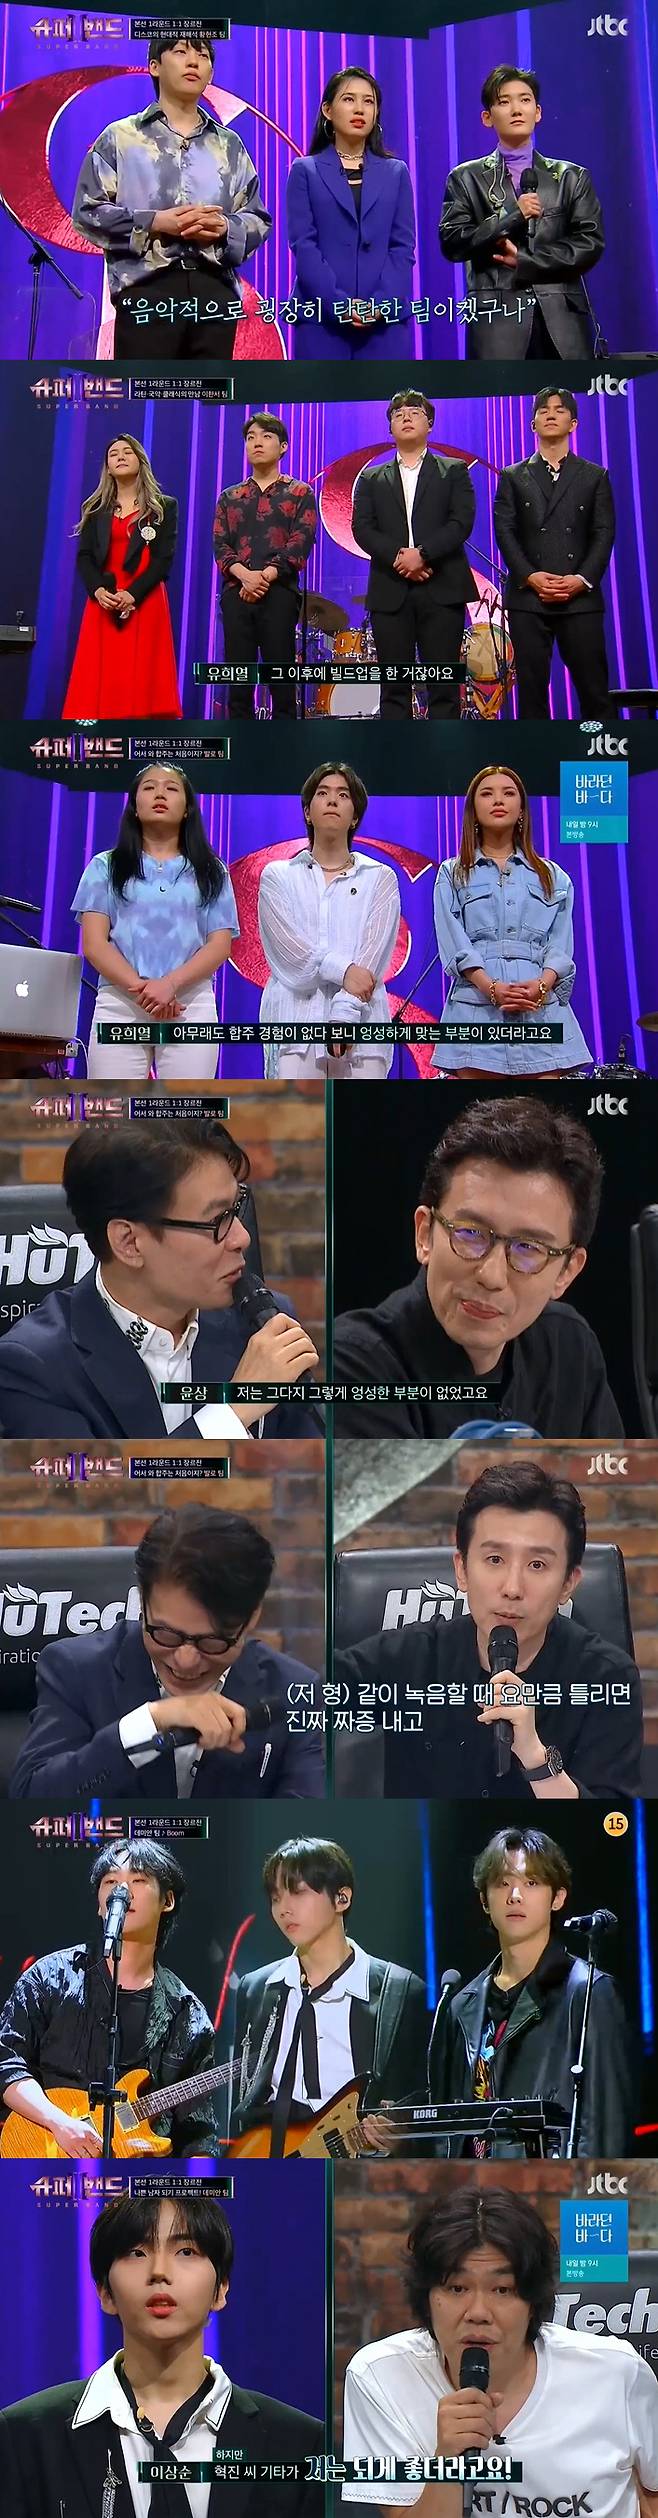 Lee Sang-soon reveals Lee Hyoris reaction to watching Alvin and the Chipmunks: The SqueakquelJTBC Alvin and the Chipmunks: The Squeakquel, which was broadcast on the 26th, was released after the first round of the finals.The second round of Rivers Point of Fame was followed.On this day, Hwang Hyun-jos team showed the stage that reinterpreted UVs Itaewon Freedom as a nuisance genre of urban mood.Producers on the stage, which is thoroughly prepared not only for the sound but also for the stage production, praised it as a stage that was very good than any bands stage.In particular, You Hee-yeol noted that this friend seems to be a thing about the frontman Hwang Hyun-jo.Lee Han-seo, who confronted Hwang Hyun-jos team, reinterpreted the Latin, Korean music and classical music by combining part of Pansori with Besame Mucho.In particular, Kim Sol Daniel, who was the first player that other participants wanted to share, was together, and Lee Han-seos stage was more anticipated.It is Feelings that forced the Besame Mucho into the color of this team, said Yoon Jong Shin. I heard less of Feelings that the mashup was good with one song.You Hee-yeol pointed out that the composition of Chunhyangga and Besame Mucho lacked probabilities.As a result of the producer vote, Hwang Hyun-jos team won 5-0, and Lee Han-seos team became a candidate for elimination.The match was a match between Balo and Damian teams, which were composed of members who had never been staged as a band before, which caused curiosity.Those who arranged the OST A Million Dreams of the movie Great Showman gave a stage to maximize the hopeful Feelings.After the teams stage was over, the producers gave mixed reviews.You Hee-yeol said, I feel like I have tried to make a sound, but I have a bad part because I have no experience of joining.However, Yoon Sang praised the three peoples performances, selections and harmony, saying, I did not have such a mess. I am so cool that I am so heartbroken.I dont know if Ive passed the sloppyness that only a cold person can know, he said, sniping You Hee-yeol (?), so You Hee-yeol said, Im a really bad brother.When I recorded it together, I was really annoyed and closed the door and went out. Lee Sang-soon also laughed at the support shot that he was the most sensitive person here. Yoon Jong Shin expressed regret for the selection that did not fit the vocalist Mun Soo Jins range, and Lee Sang-soon was acclaimed as a possible band.Damians team selected Boom and presented an experimental sound such as vocoder, electronic music source of Future bass sound, and chic guitar line to maximize dynamics.After Damians stage, CL revealed that this was the hardest stage ever; he said the arrangement was so good but I was sorry for Performance.It was a strong song, but I was sorry that Attitude did not come out, but the arrangement was good and cool.Lee Sang-soon also pointed out his regrets for Performance.On the other hand, Yoon Sang commented, I think its right to pretend to be indifferent; the arrangement was a bit good.However, he expressed regret for the vocals, and Yoon Jong Shin also sympathized.You Hee-yeol also shared her regrets for vocals, but praised Damian for her potential and called her growth character.The results of the two teams, which received favorable reviews and criticism side by side, were 4-1, and the team succeeded in entering the next round.The last stage was a two-member Lee Dong-heon team and Kim Sung-ong team.Lee Dong-heon, who selected Someone Like You, set up a chord with a male duet and added warmth with acoustic guitar to show the stage arranged.On the stage of the two people who played only with vocals, Yoon Jong Shin said, The tone of both people was well heard. I do not try too much to do this, and I think I have Choices to listen to the two voices and the sound of flying.I think the song is well Choices. Lee Sang-soon also said, I thought I wanted to see two people with the band.I made it more curious when I was with the band. Kim Sung-ong, who collected topics by age 18, played the stage of Candy Shop Girl, which reinterpreted Tobacco Shop Girl.The stage of the two men, who overcame the 18-year-old difference and showed fantastic musical synergies, made other participants enthusiastic.It was so exciting, the arrangement was good, it was an entertaining stage overall, CL praised.Yoon Jong Shin praised Kim Sung-ongs performance and consideration, and the performance of Other Shindong Idaon. Lee Sang-soon also commented on Idaon, I think gifted people are right.I think it will be something. Kim Sung-ongs production skills and leadership were also raised. The results of the two teams that made the crisis an opportunity were 4-1.After the final stage, the final Out box of the first round of the finals was released; Out box was five members of the bands: Sunjae, Sung Hyuk, and Handadu (Lee Han-seo, Kim Da-ham, and Song Doo-yong).The 48 participants who entered the second round of the finals through the harsh mission prepared a new mission, River Landing.Prior to the full-fledged second round stage, MC Jeon Hyun-moo asked producer Lee Sang-soon to respond to Lee Hyori.Lee Sang-soon then replied, The participants were so good that I was not interested in me very much. As for the participants who were watching, I am mainly interested in male participants.Even if you look at the waiting room scenery passing by for a while, you keep asking, Who is that handsome man?You Hee-yeol, who heard this, said, I know how thirsty you are in normal times.On the other hand, the first round of the second round was played by the Mungdu team and the donation team. The Mungdu team, which was in the forefront, selected Black Pinks Forever Young and received praise from producers.In particular, CL said, It seems that the green beans and Yoon Hyun-sang have brought up the bright energy of Cho Hyuk-jin. I felt that the harmony of the team was so important.Yoon Jong Shin also praised the production ability and vocal ability of mung beans.You Hee-yeol said, There is no performance-oriented show, and it is complete with a musical structure that is perfectly structured even if it is just heard by the sound source. I want to applaud the three-member band who produced the sound faithfully.